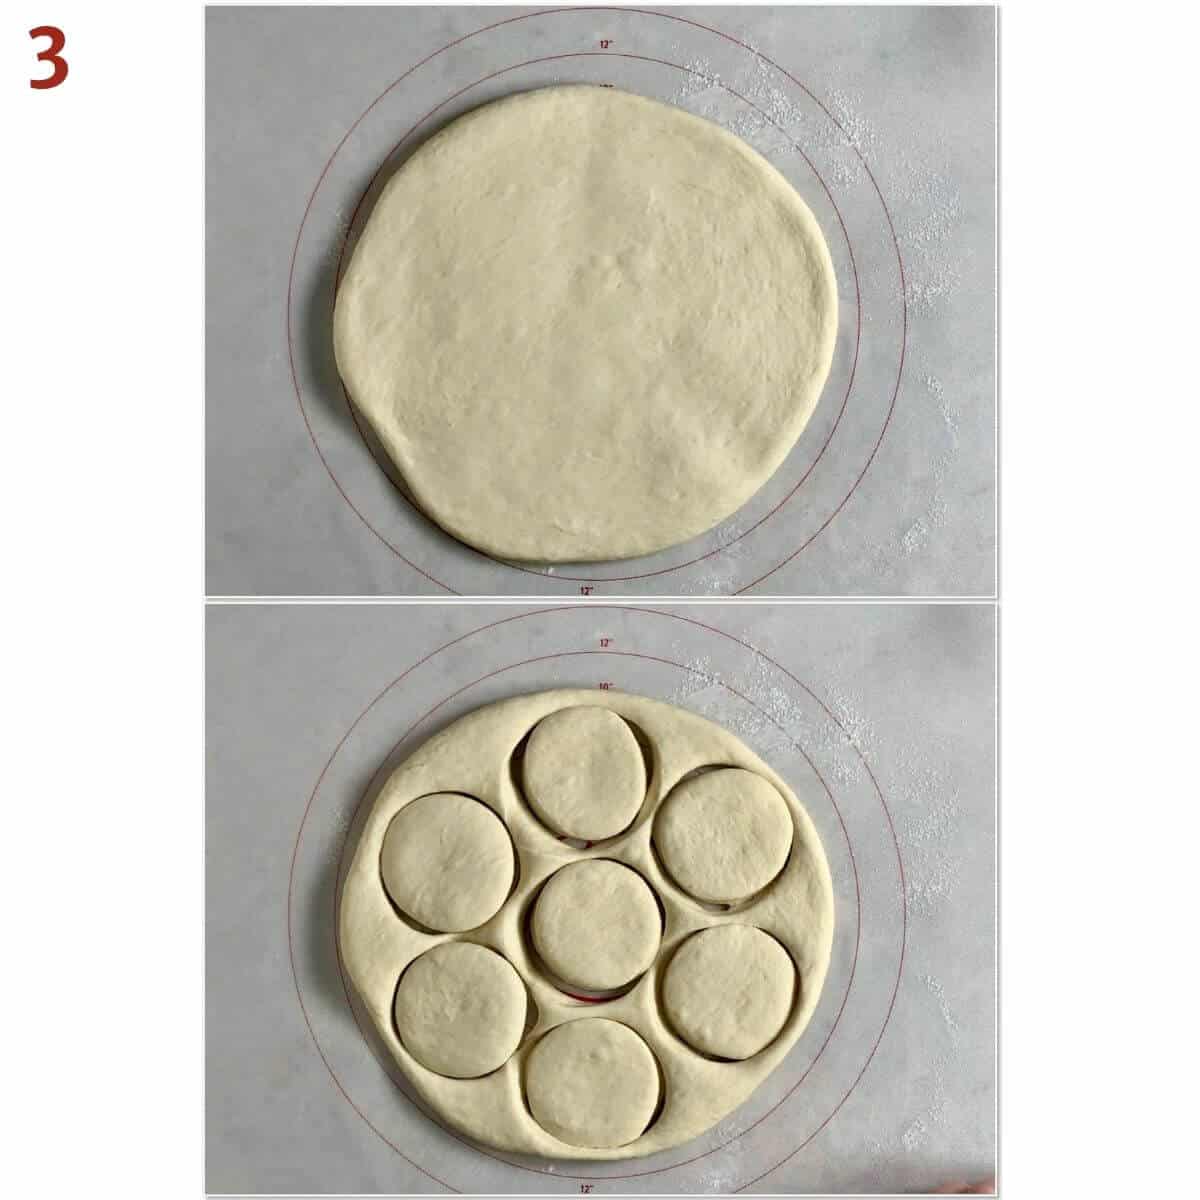 Collage of English muffin dough rolled out and cut into rounds.